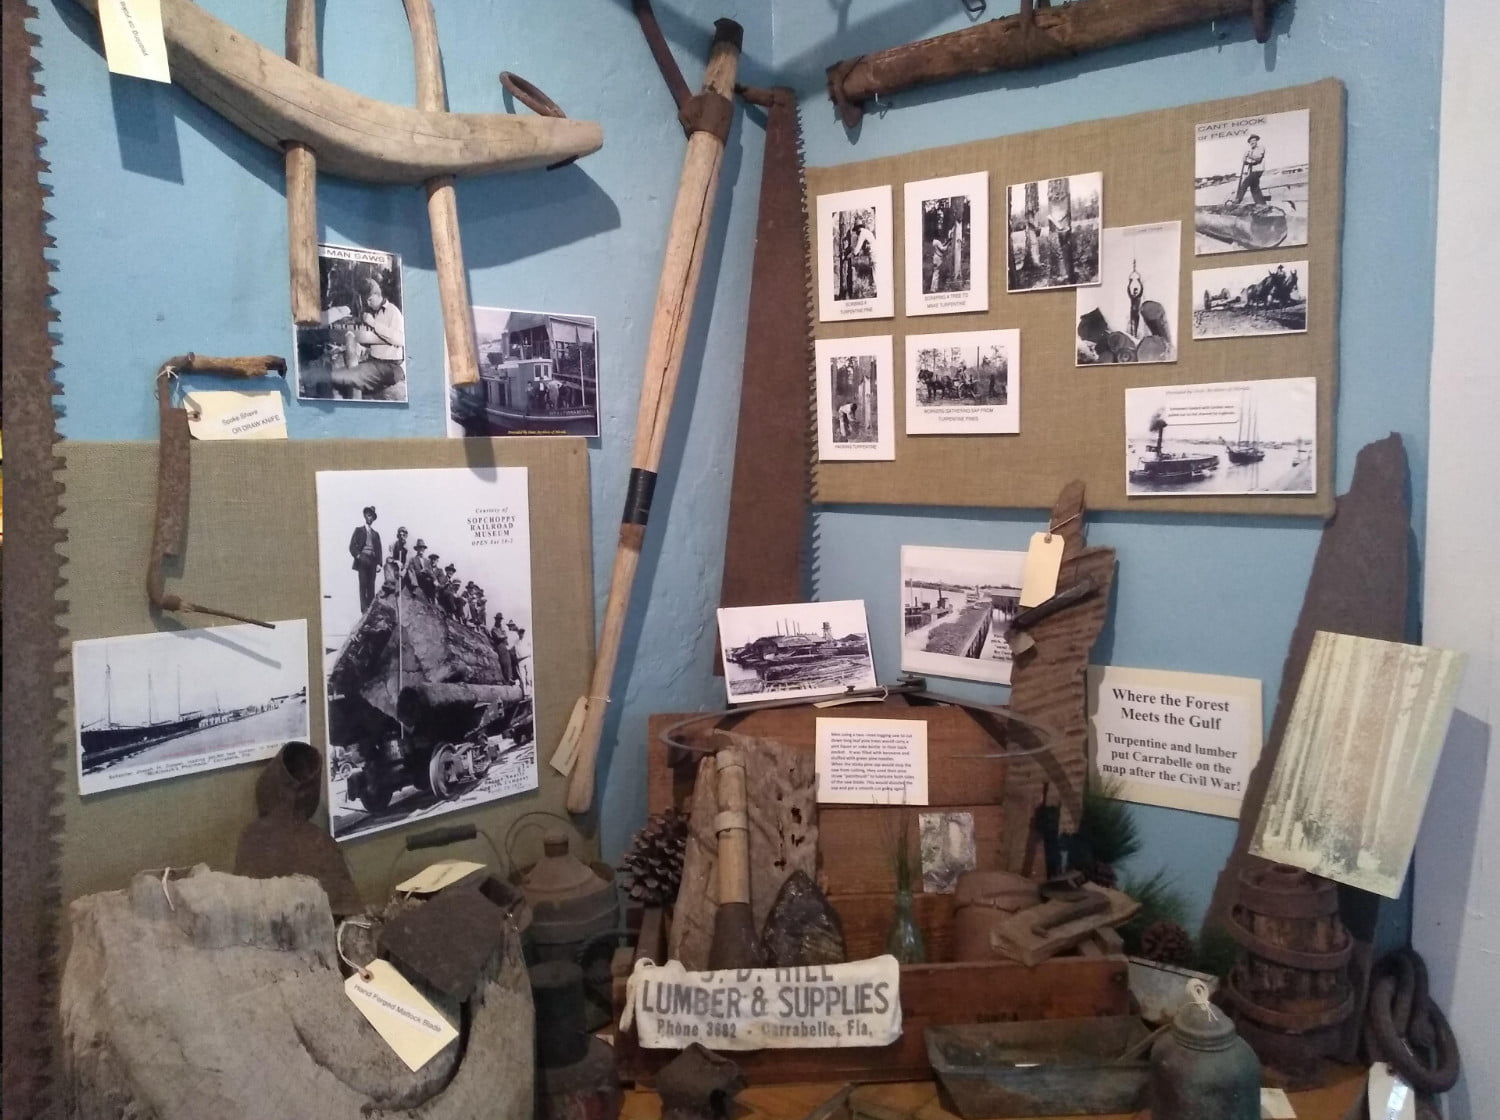 Special Exhibit on Innovations and Adaptations in Carrabelle